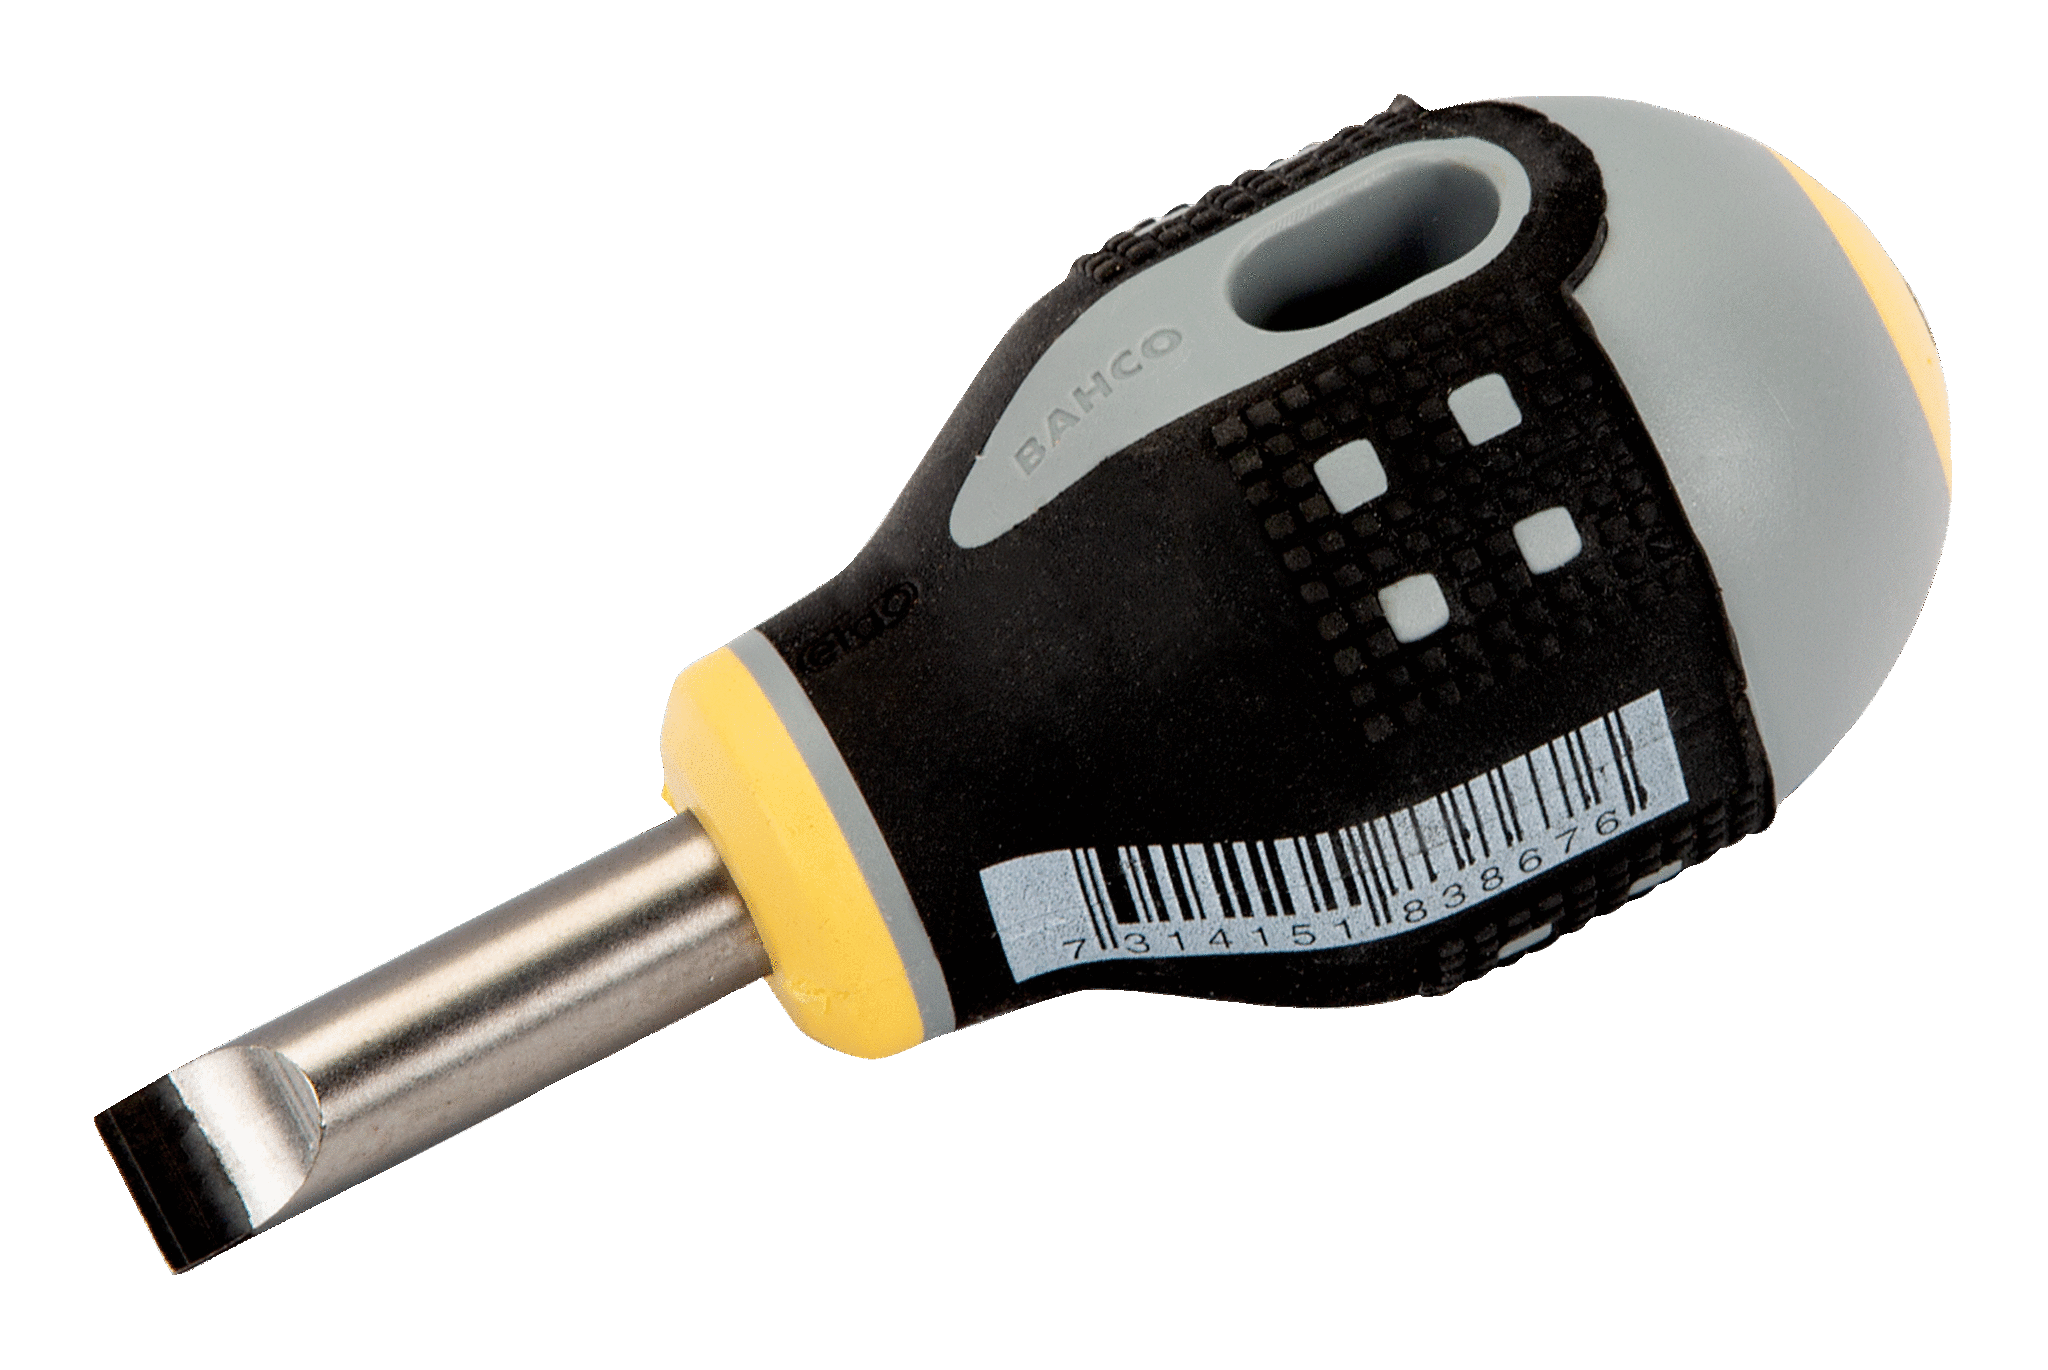 Slotted Head 152Mm Ergo Bahco Screwdriver BE-8020 